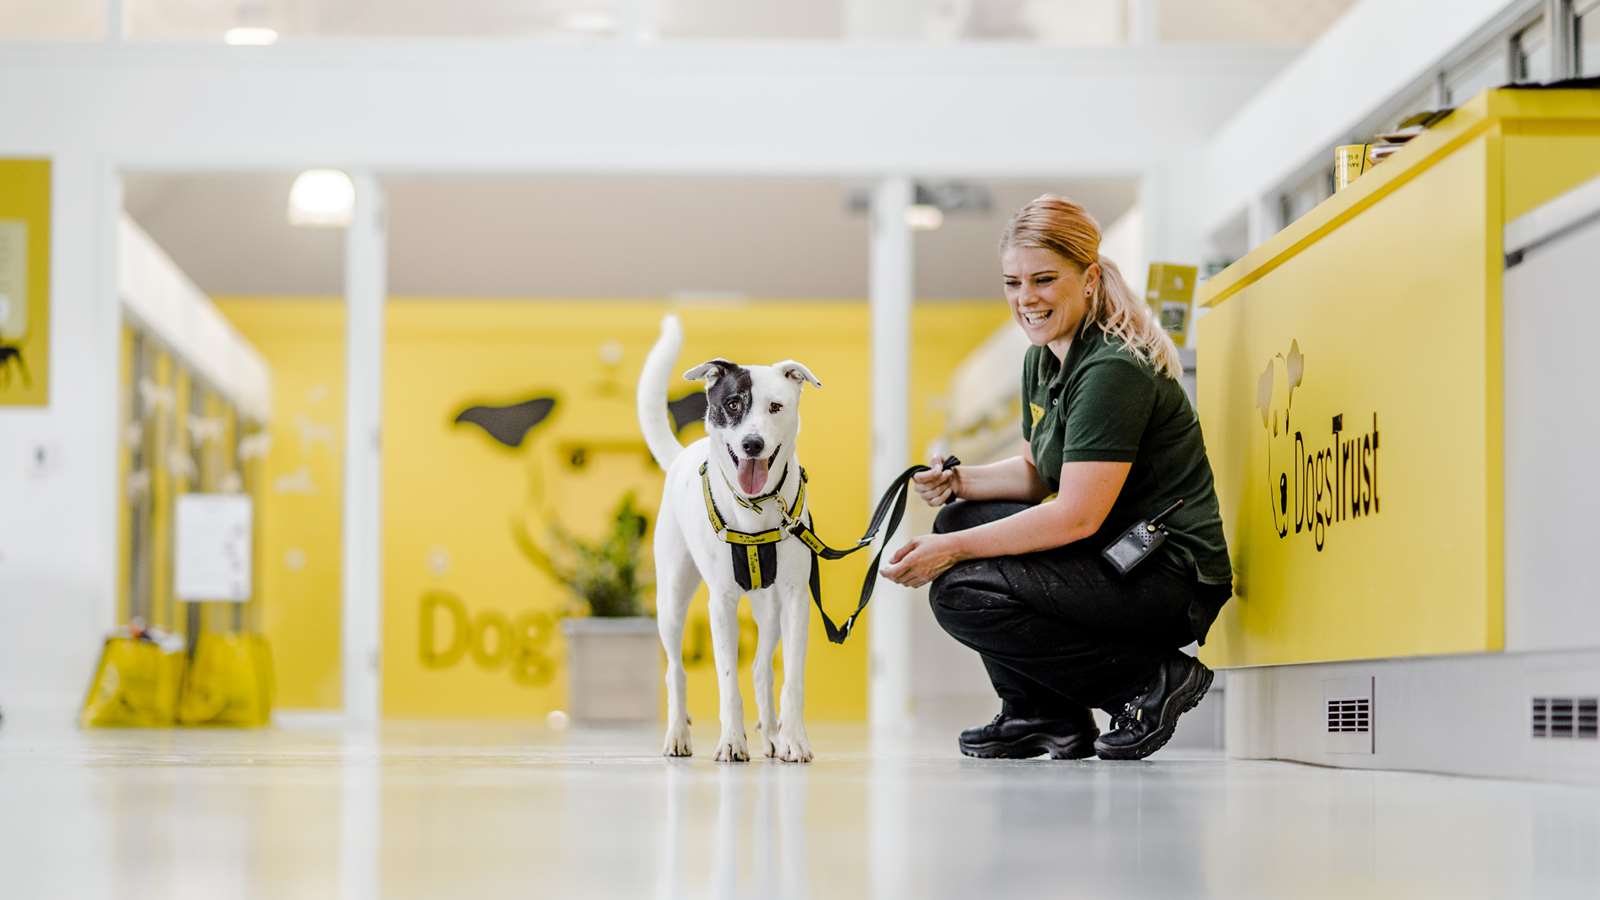 Lady with dog at Dogs Trust HQ, charity partner at Goodwoof dog event.